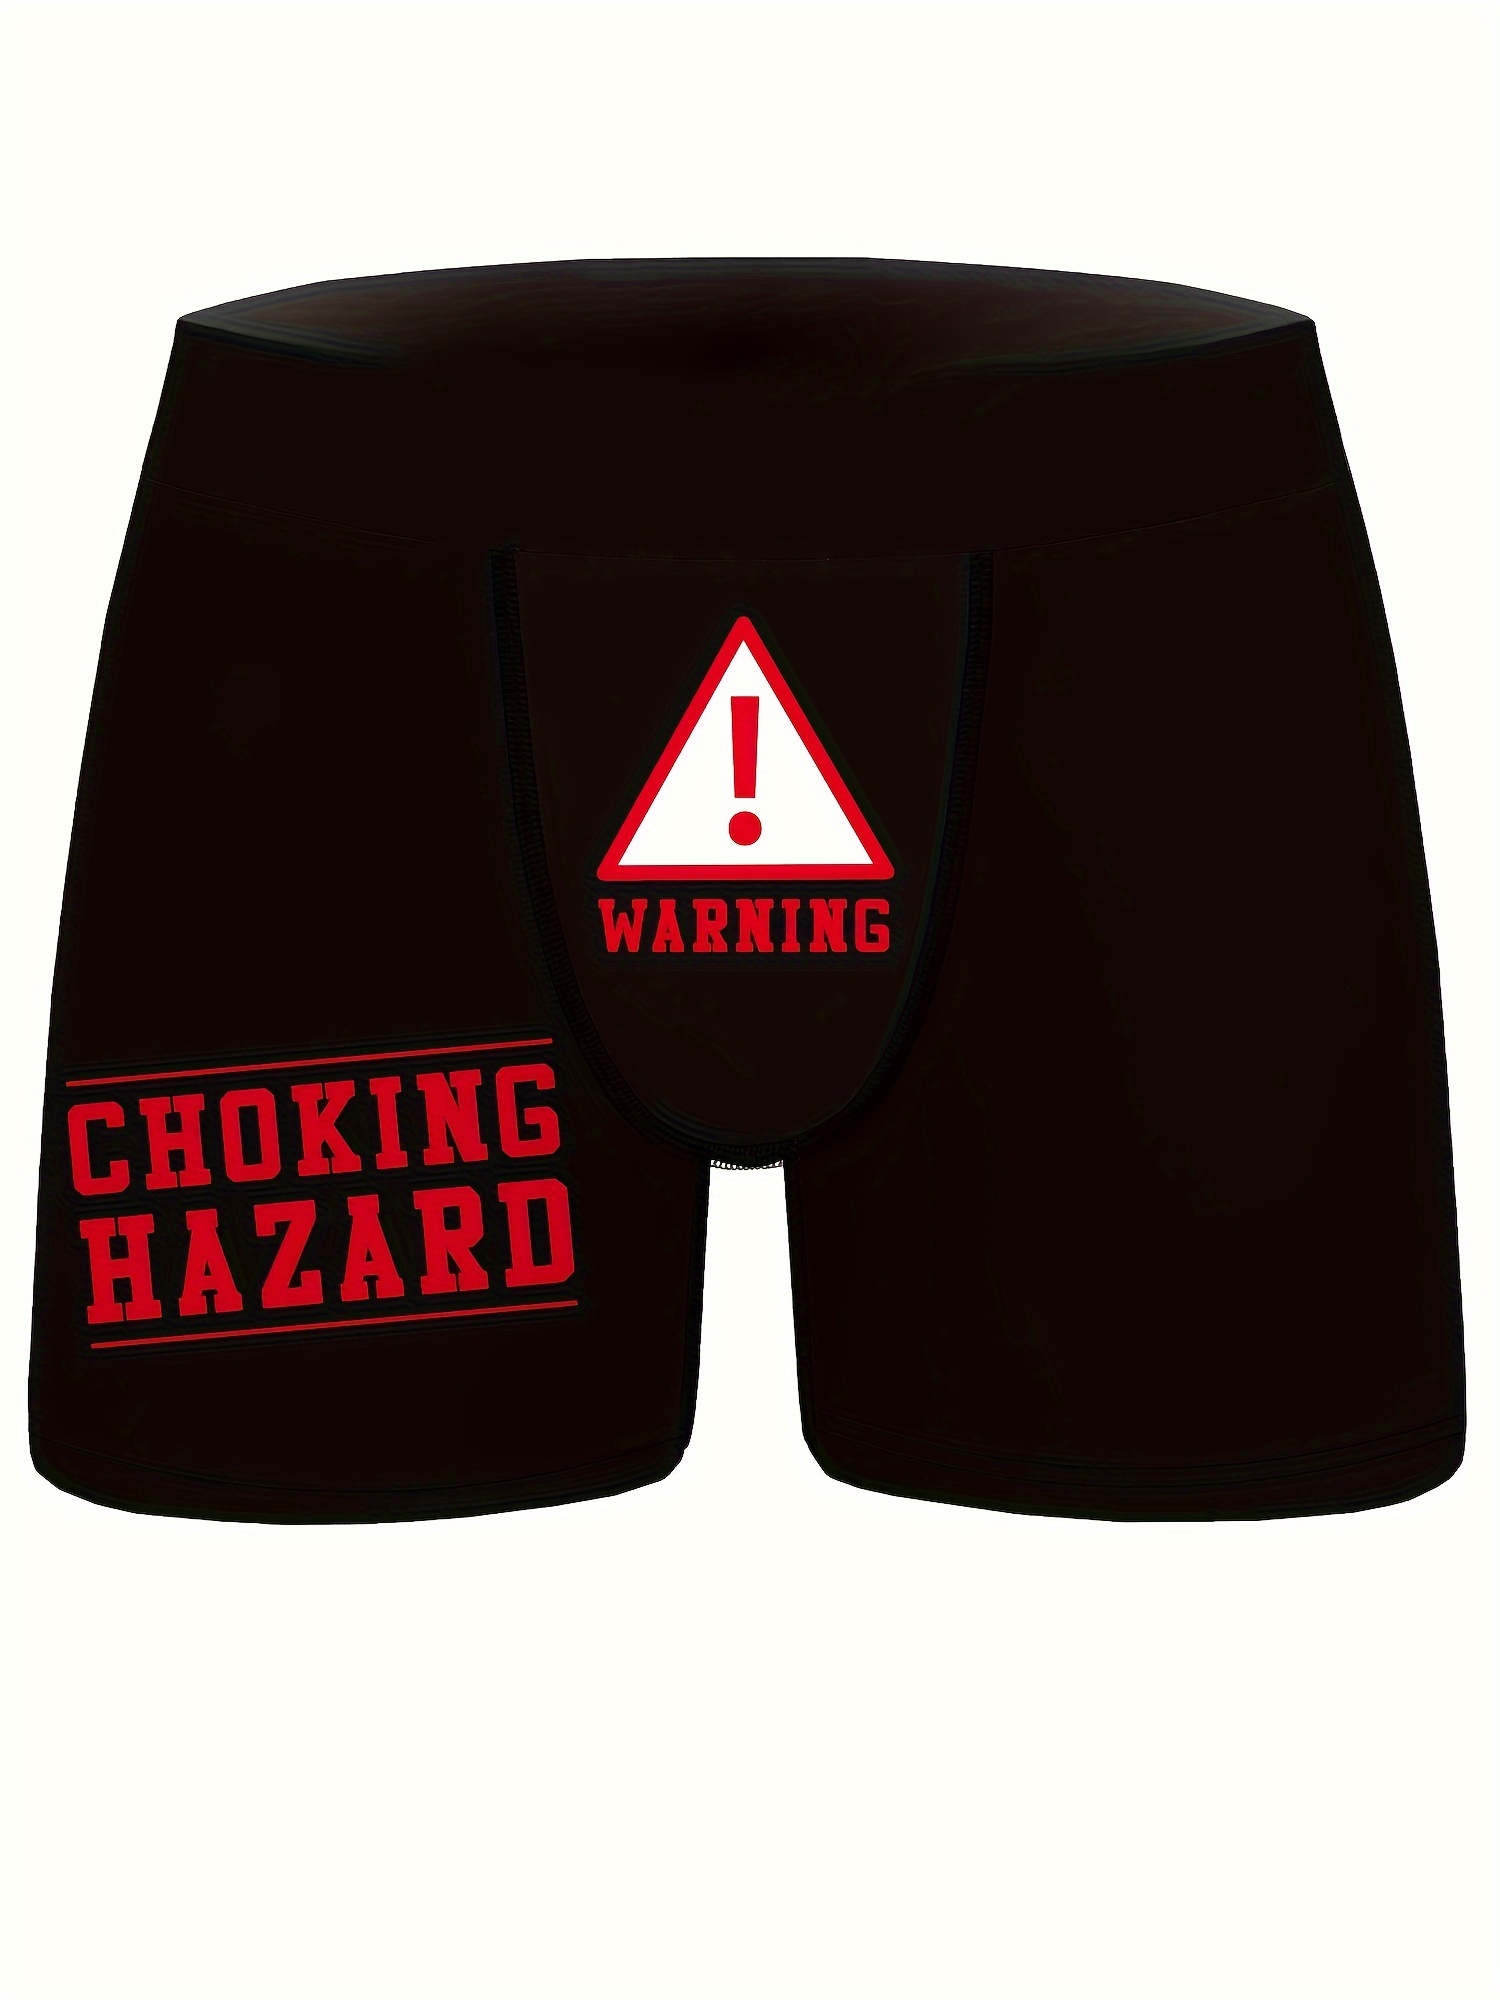 PINKHERO Funny Boxer Jack And Jones Shorts Printed Mens Underwear For  Comfortable And Stylish Wear From Dongporou, $11.67